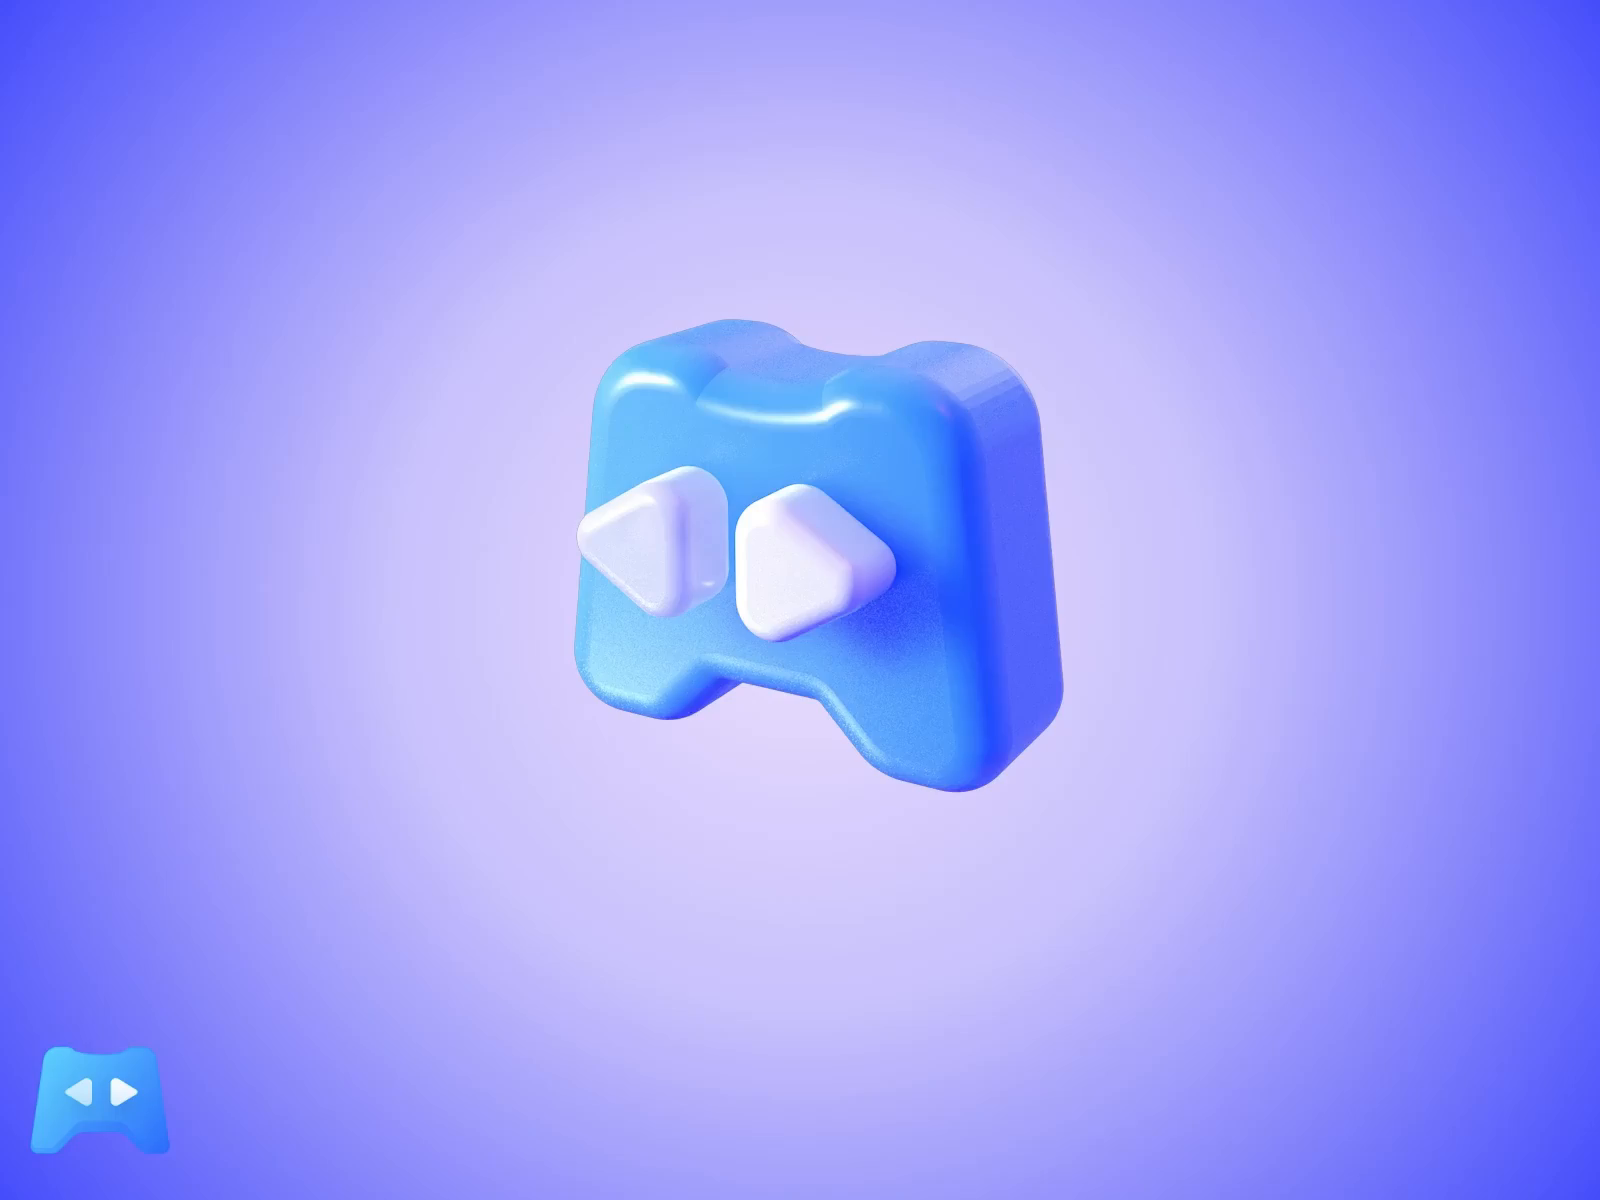 animation of 3D icons by dayvi on Dribbble